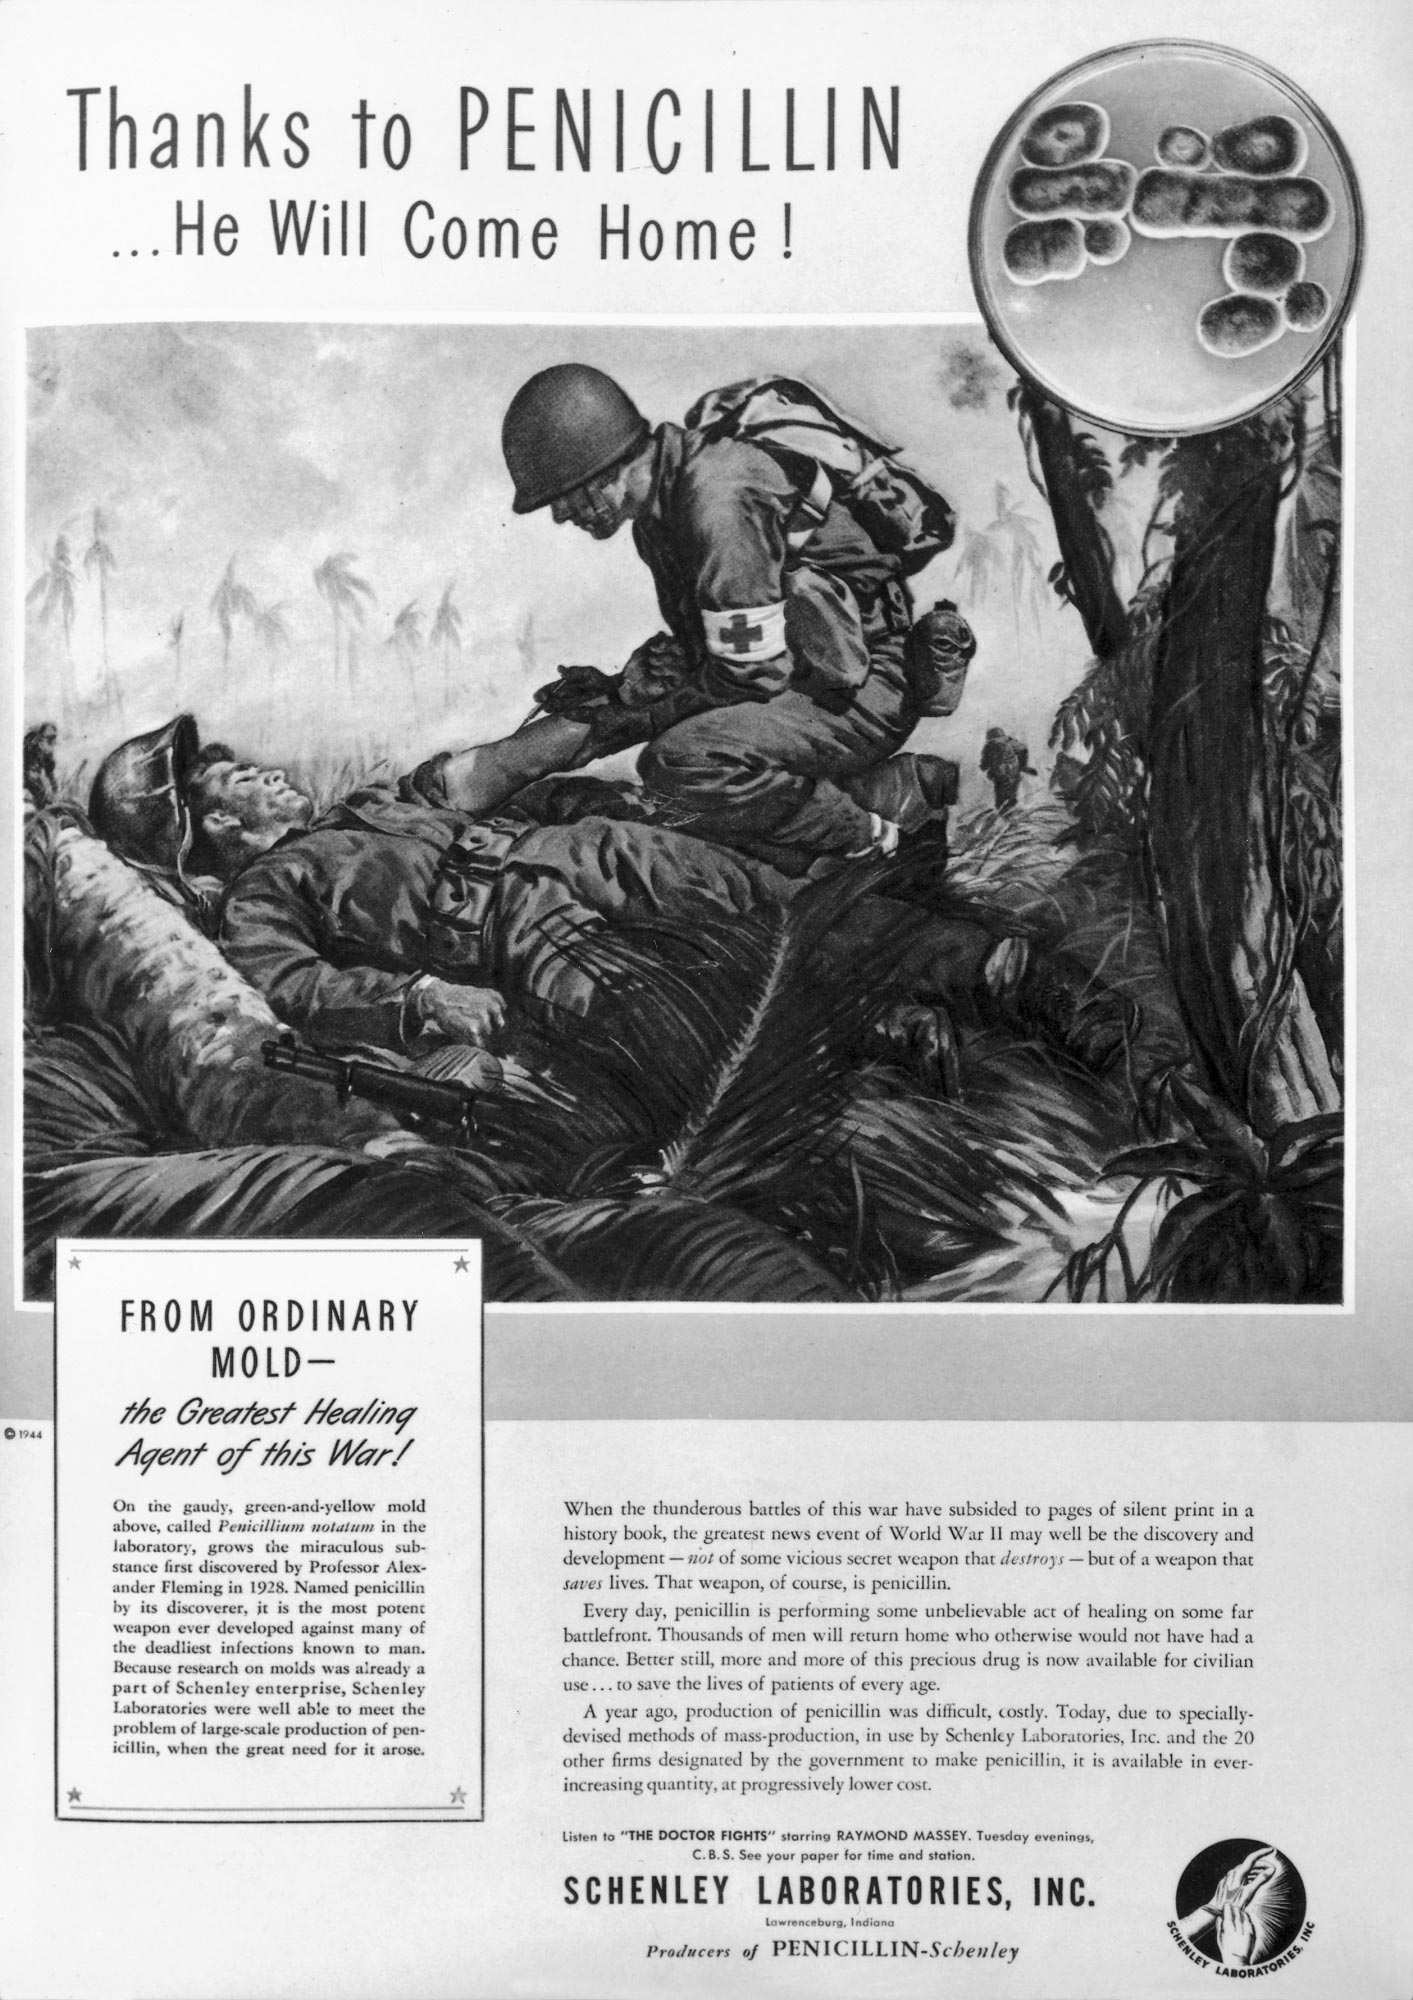 Advertisement for penicillin production from Life magazine, United States, 14 August 1944.